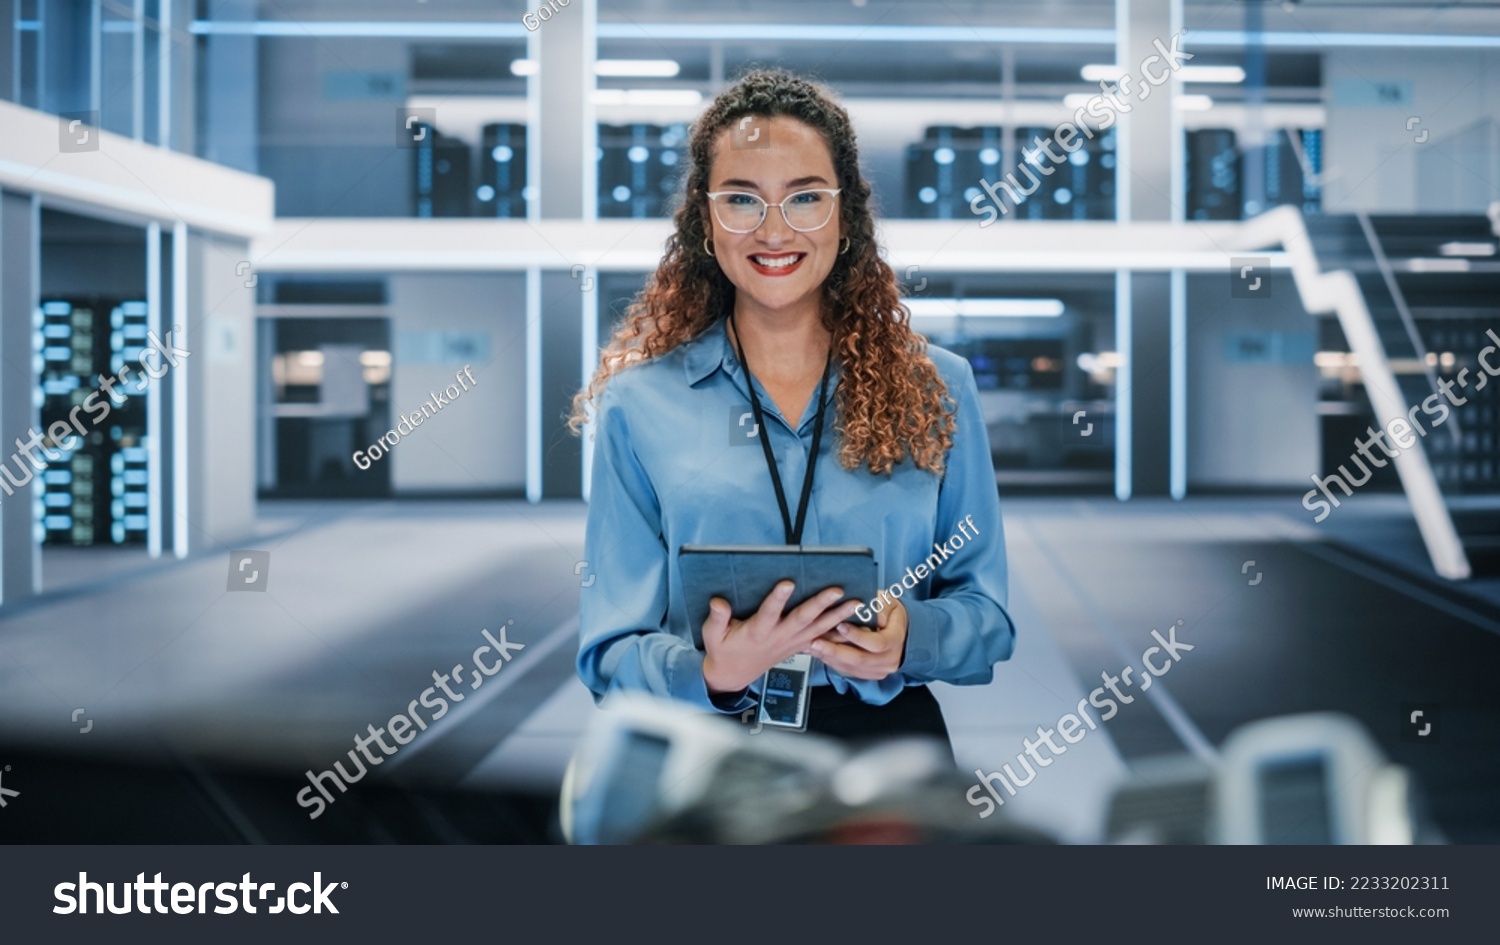 Portrait of a Beautiful Latin Female Wearing Smart Corporate Shirt and Glasses, Looking at Camera and Smiling. Businesswoman, Information Technology Manager, Robotics Engineering Specialist. #2233202311